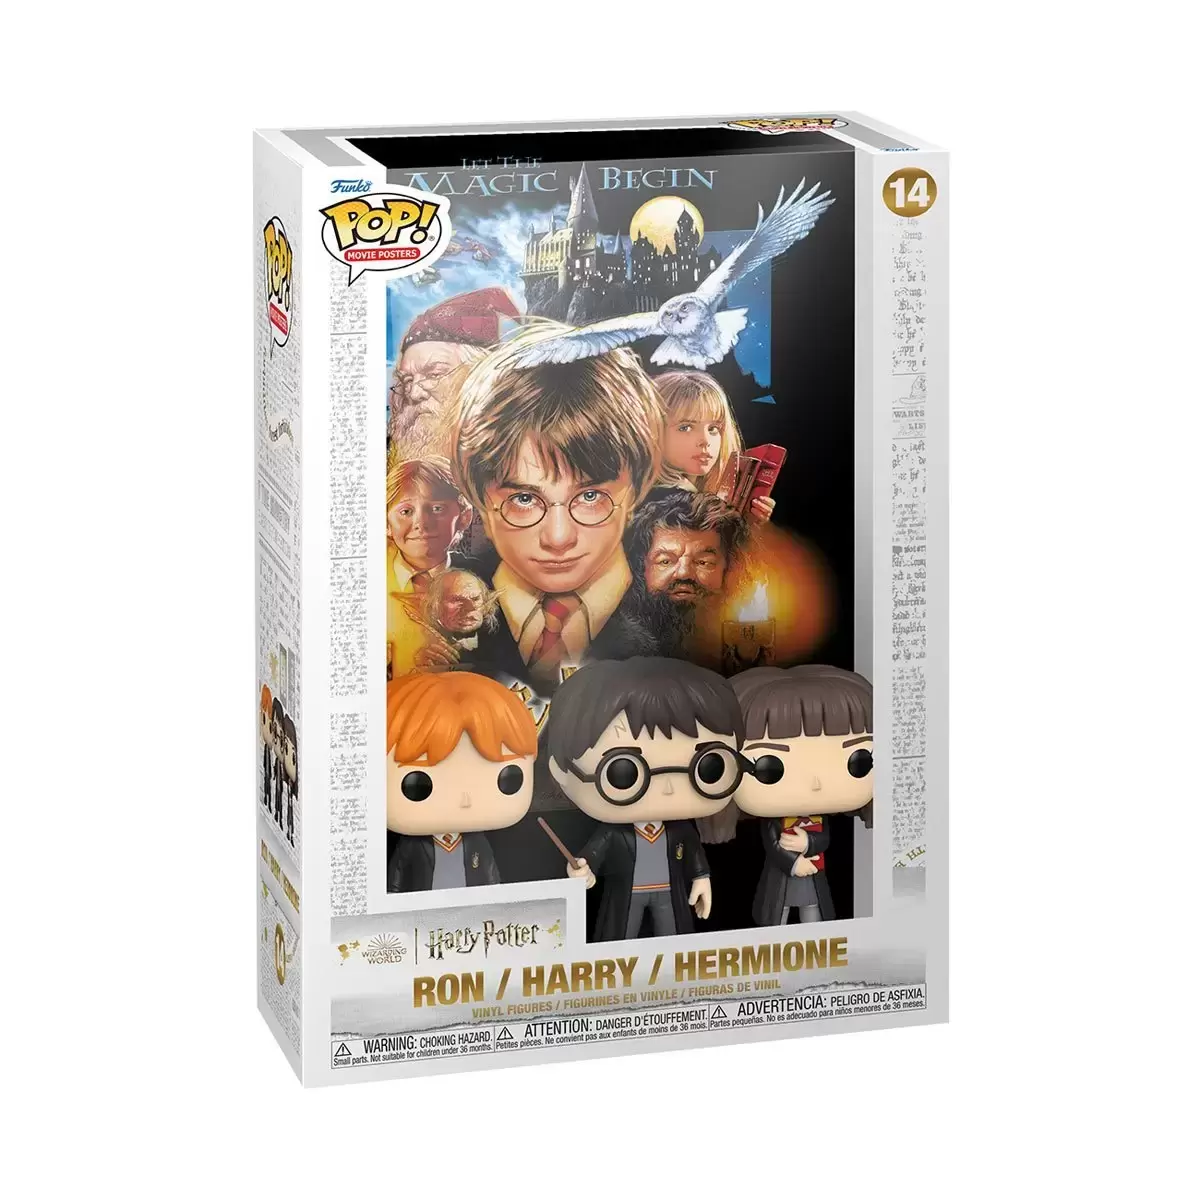 POP! Movie Posters - Harry Potter - Ron / Harry / Hermione